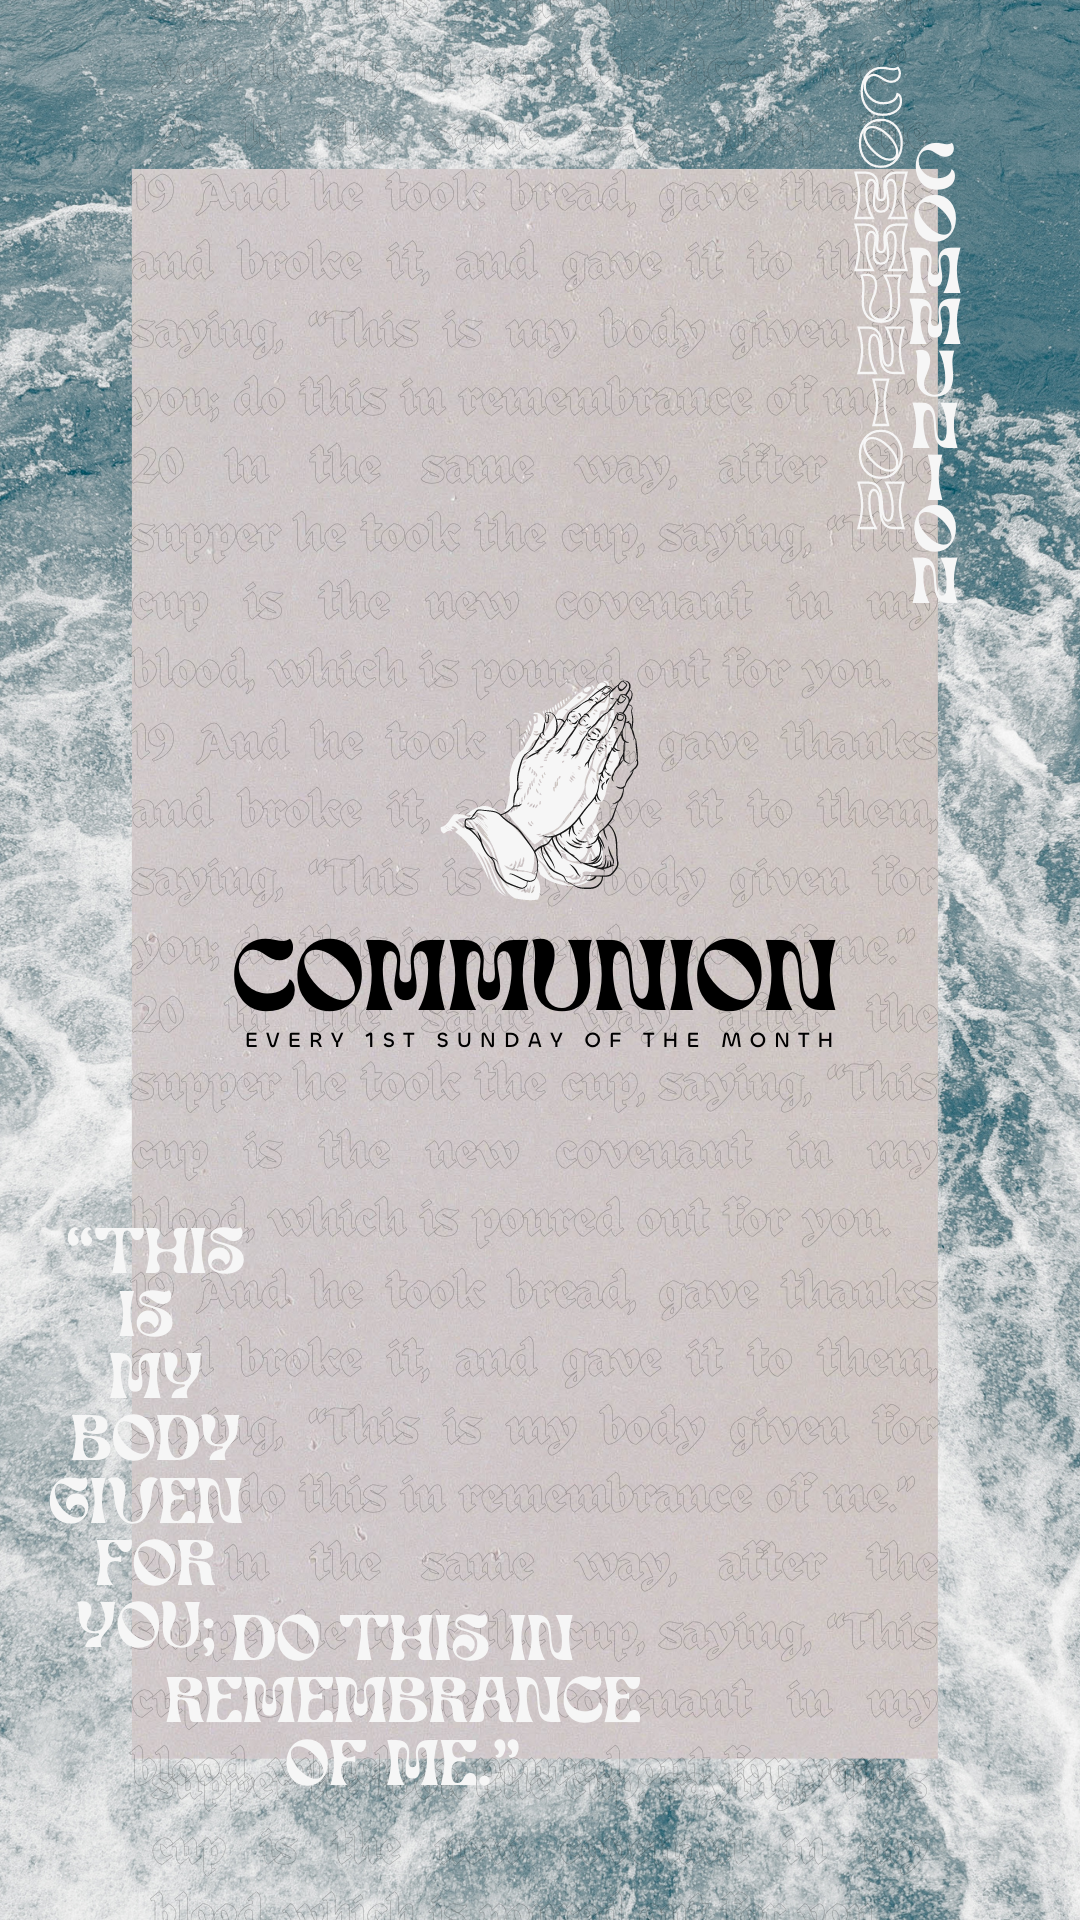 COMMUNION STORY (1080 × 1920 px).png